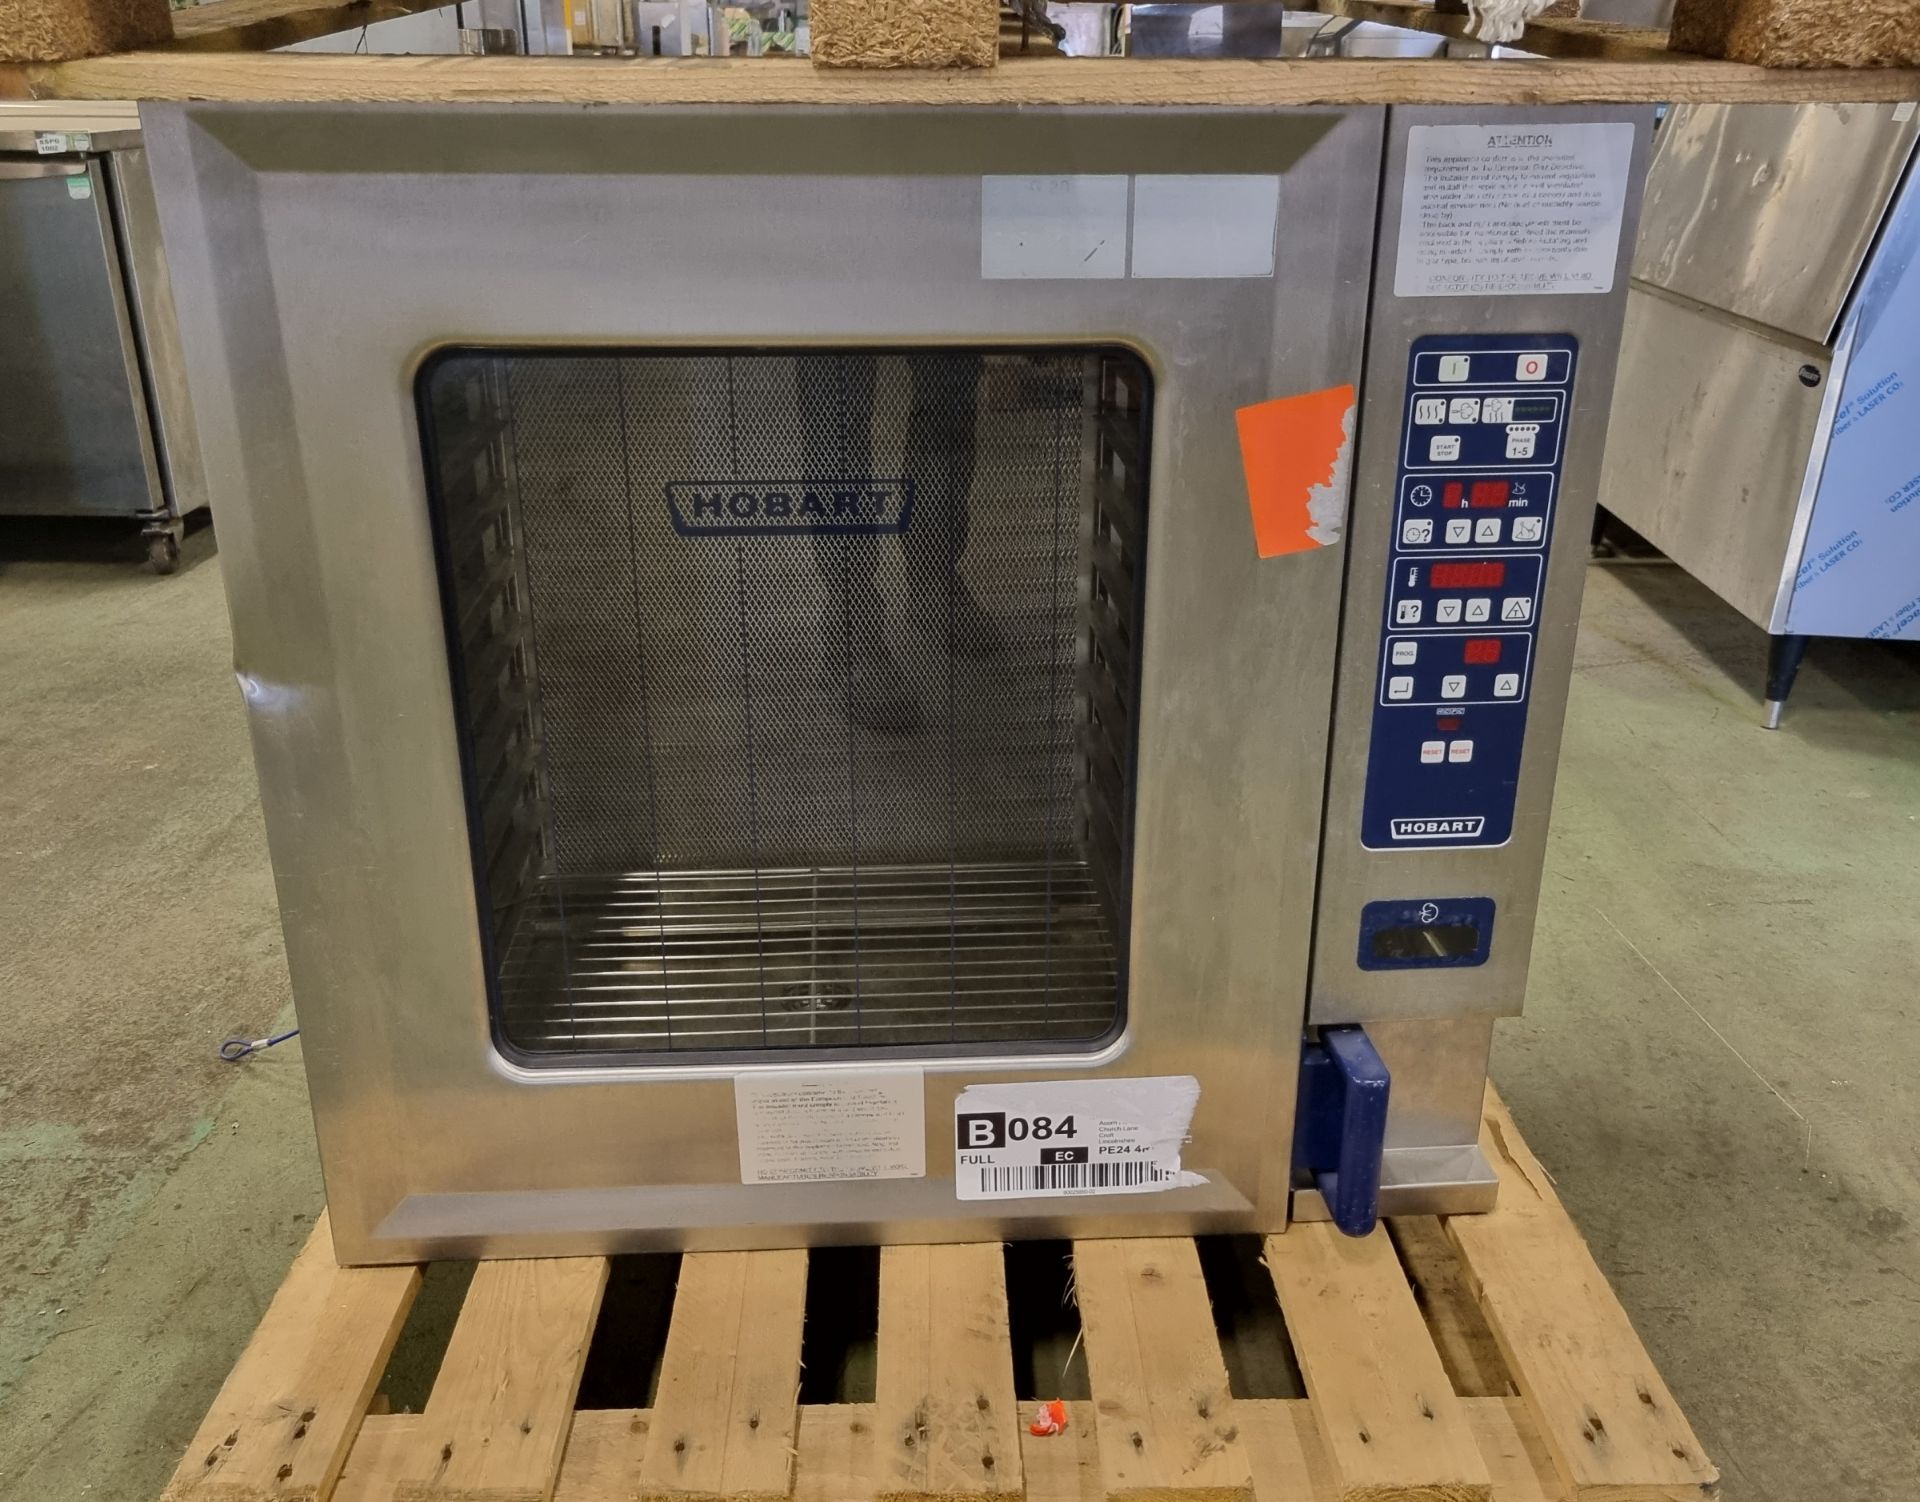 Hobart CSD 10 grid electric combi oven with base - H 95 (190) x W 80 x D 80cm - Image 2 of 8